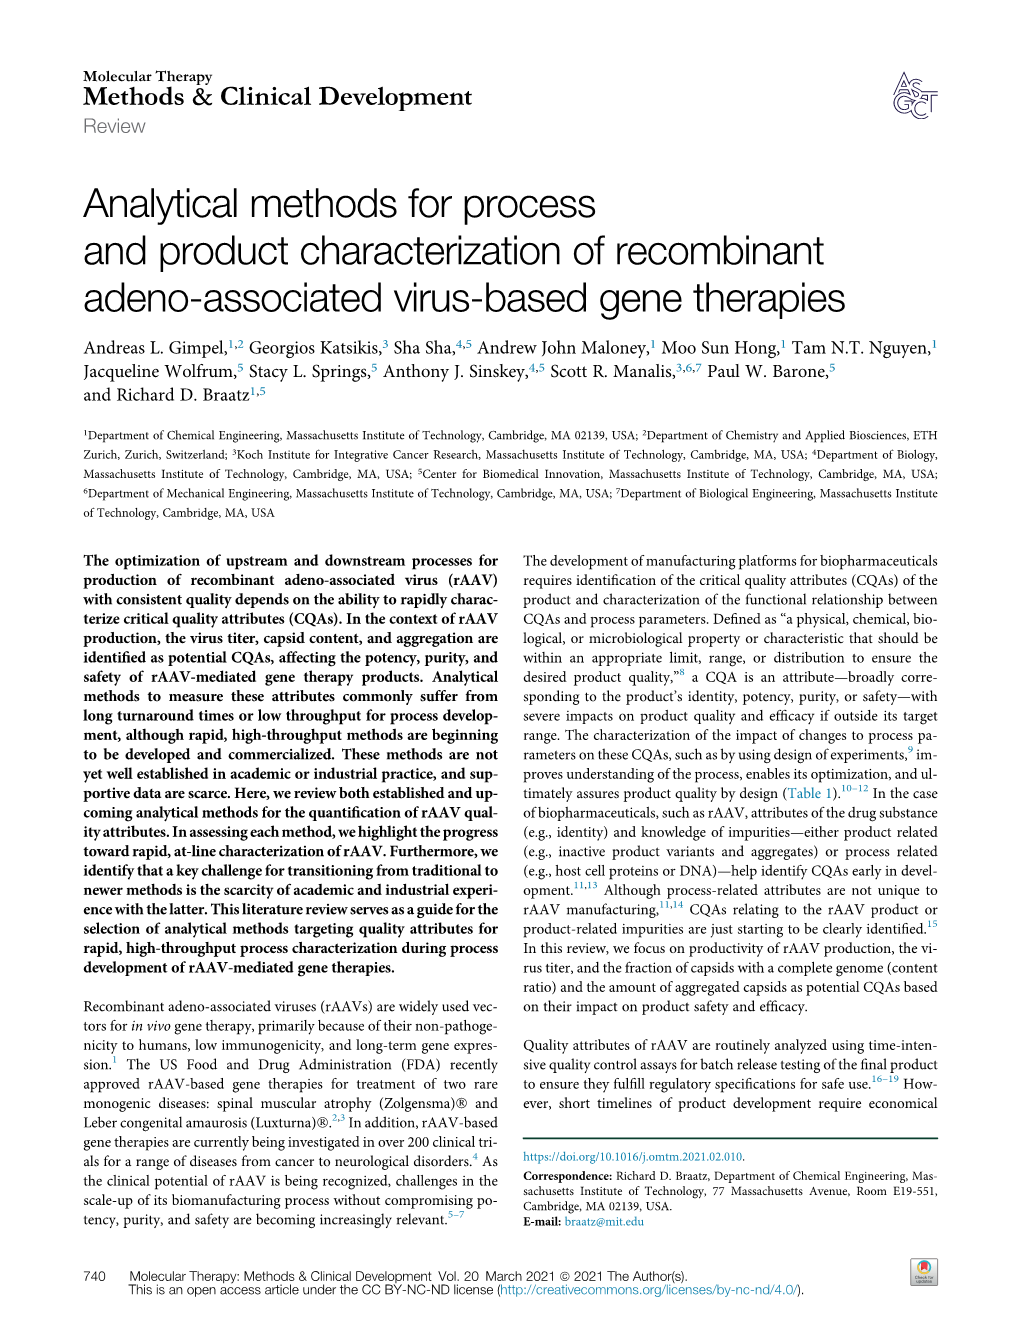 Analytical Methods for Process and Product Characterization of Recombinant Adeno-Associated Virus-Based Gene Therapies